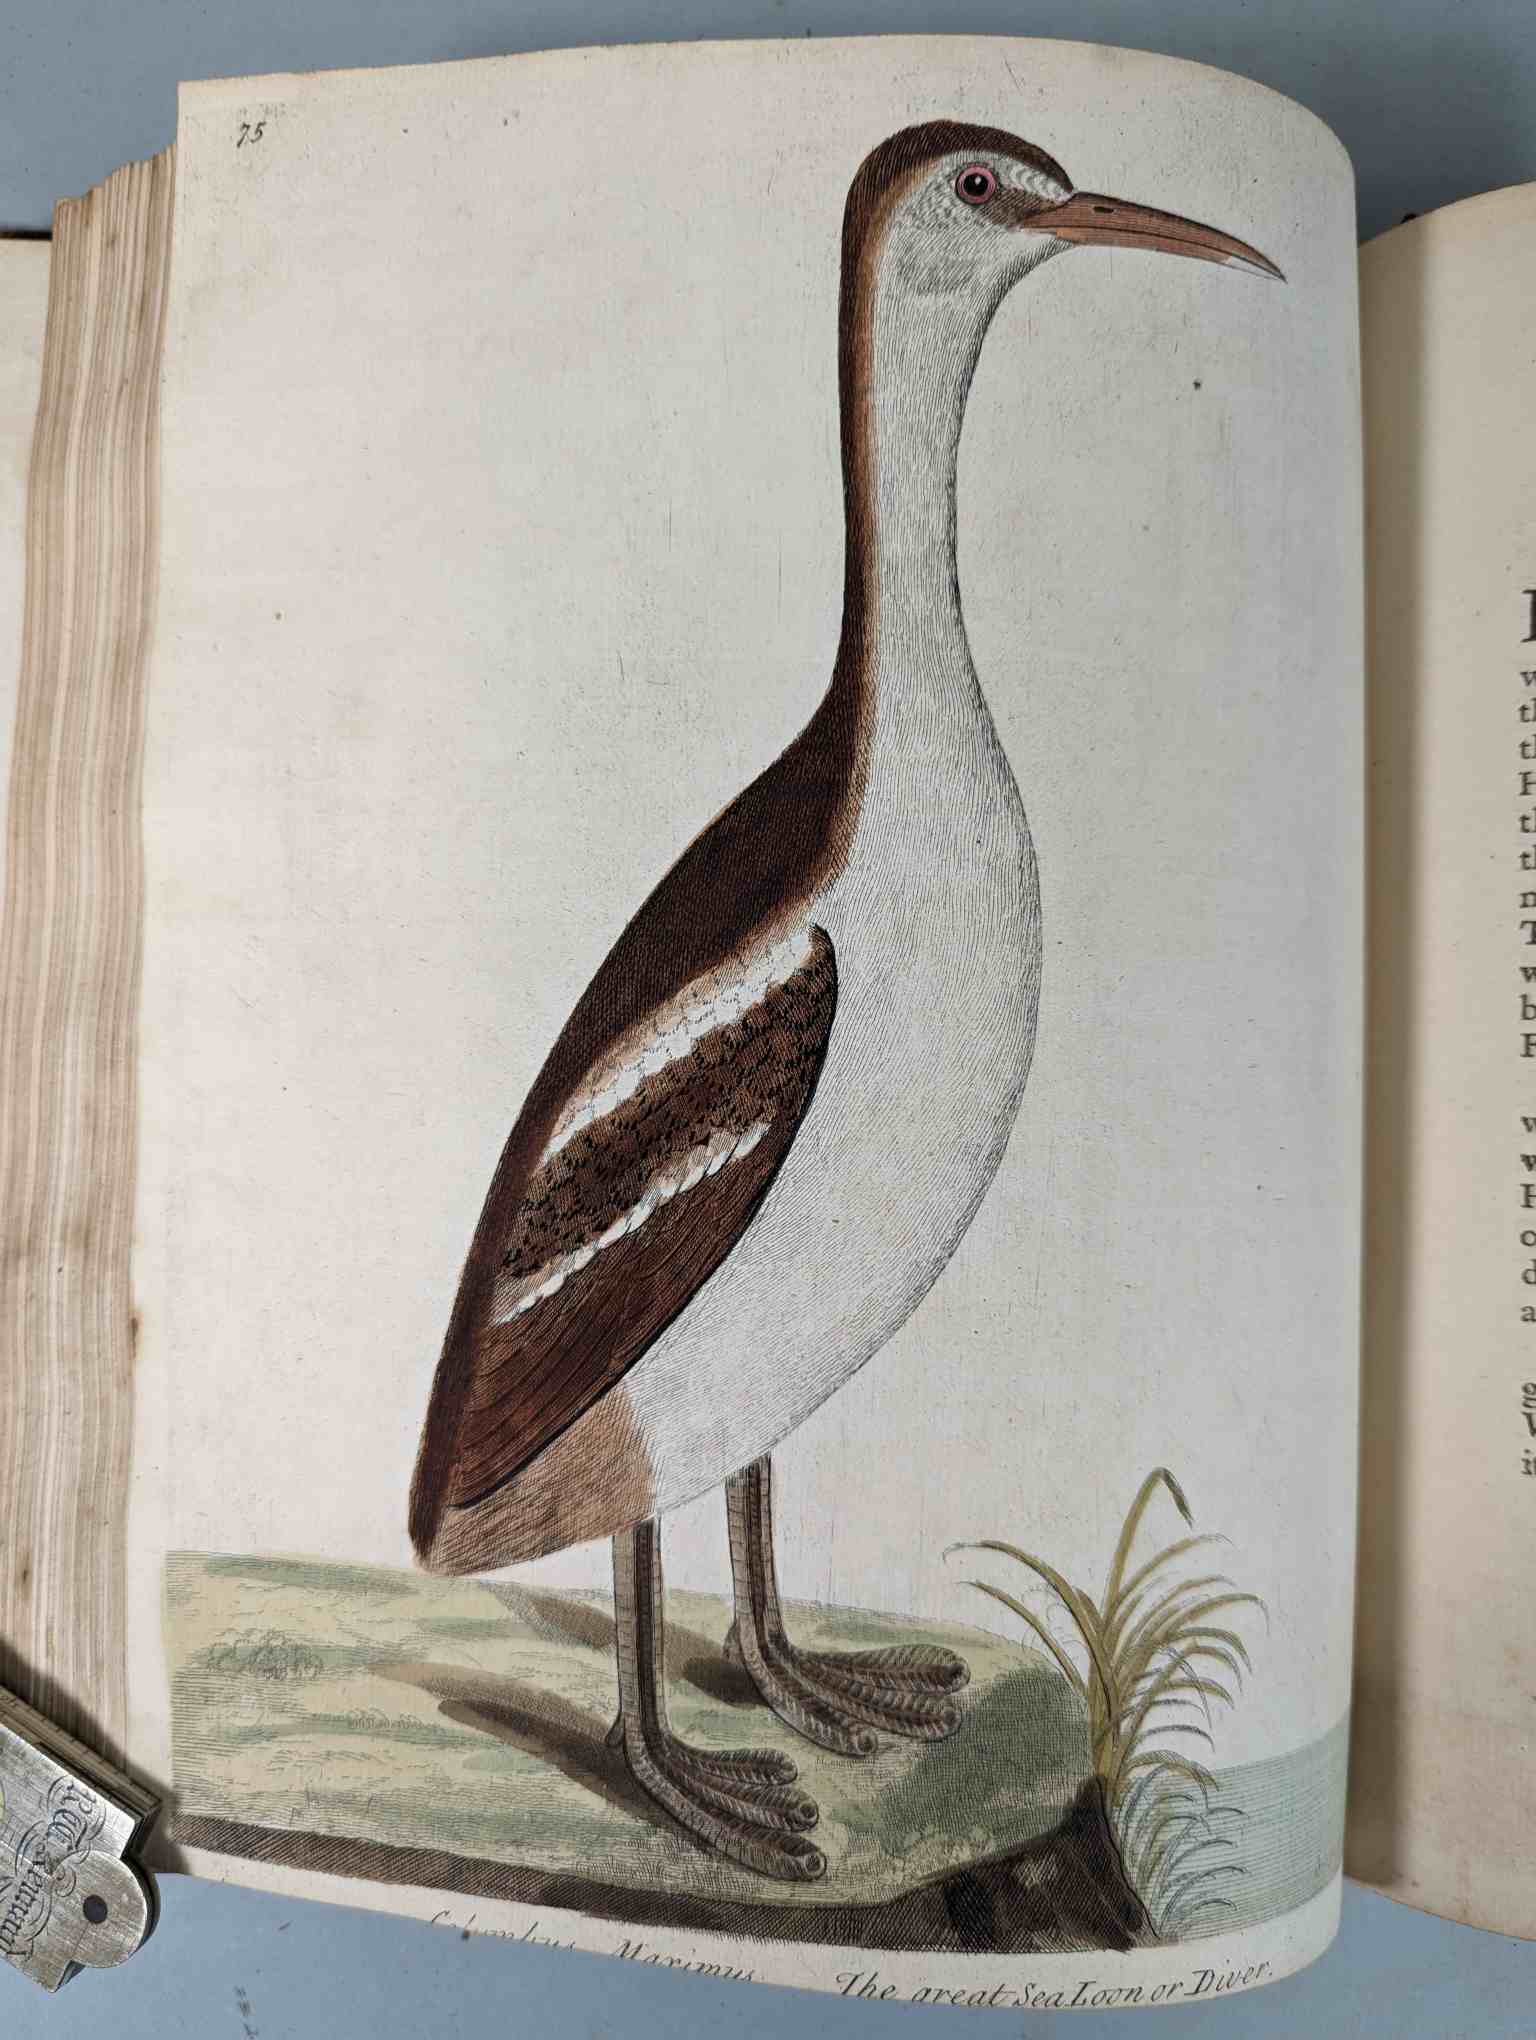 ALBIN, Eleazar. A Natural History of Birds, to which are added, Notes and Observations by W. - Image 179 of 208